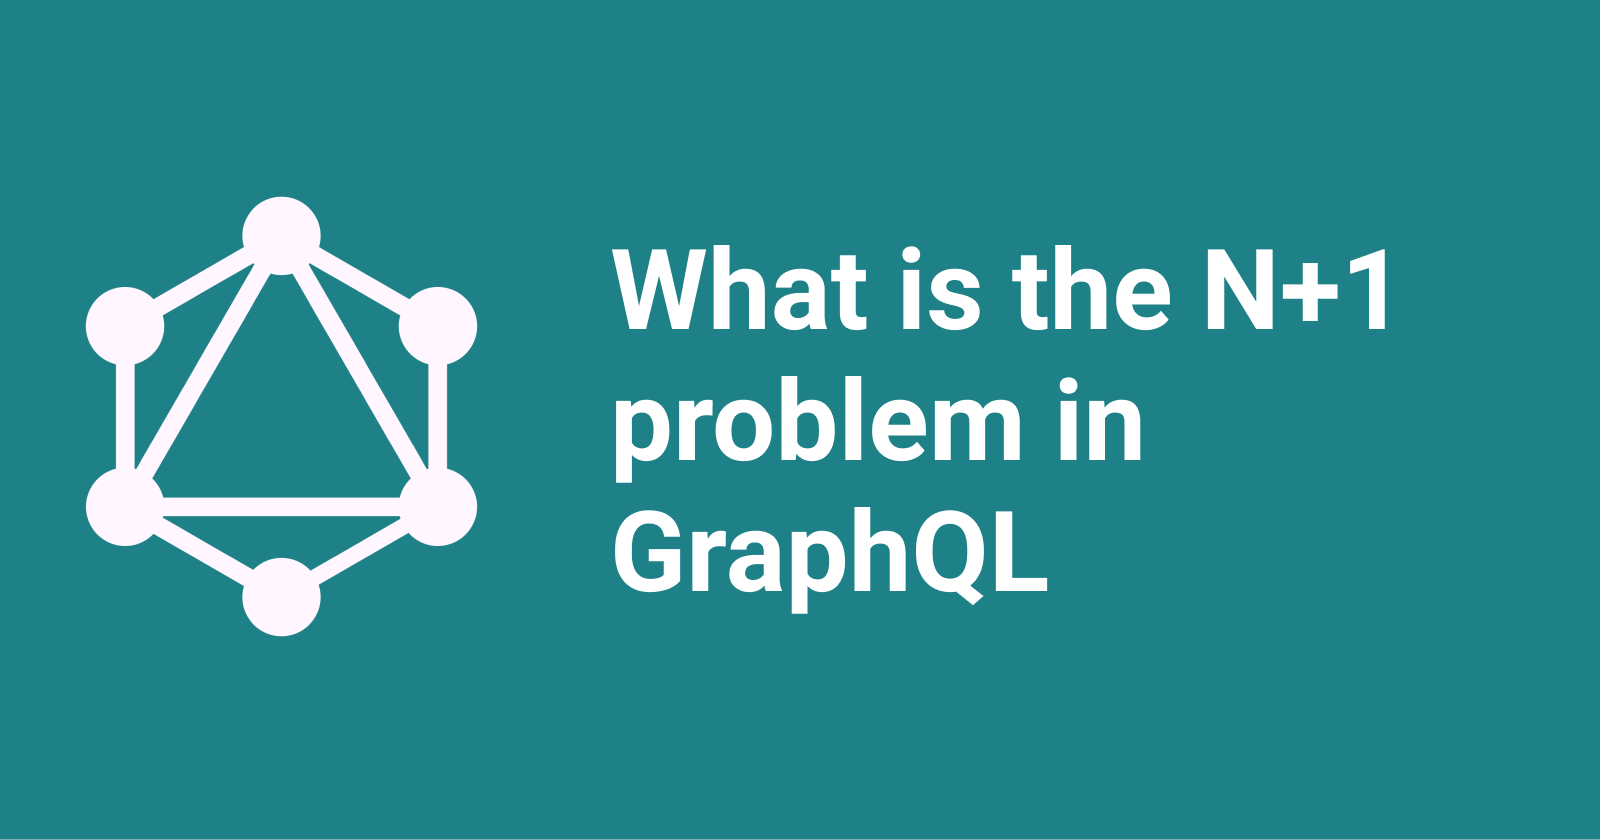 What is the N + 1 problem in GraphQL and how to solve it?